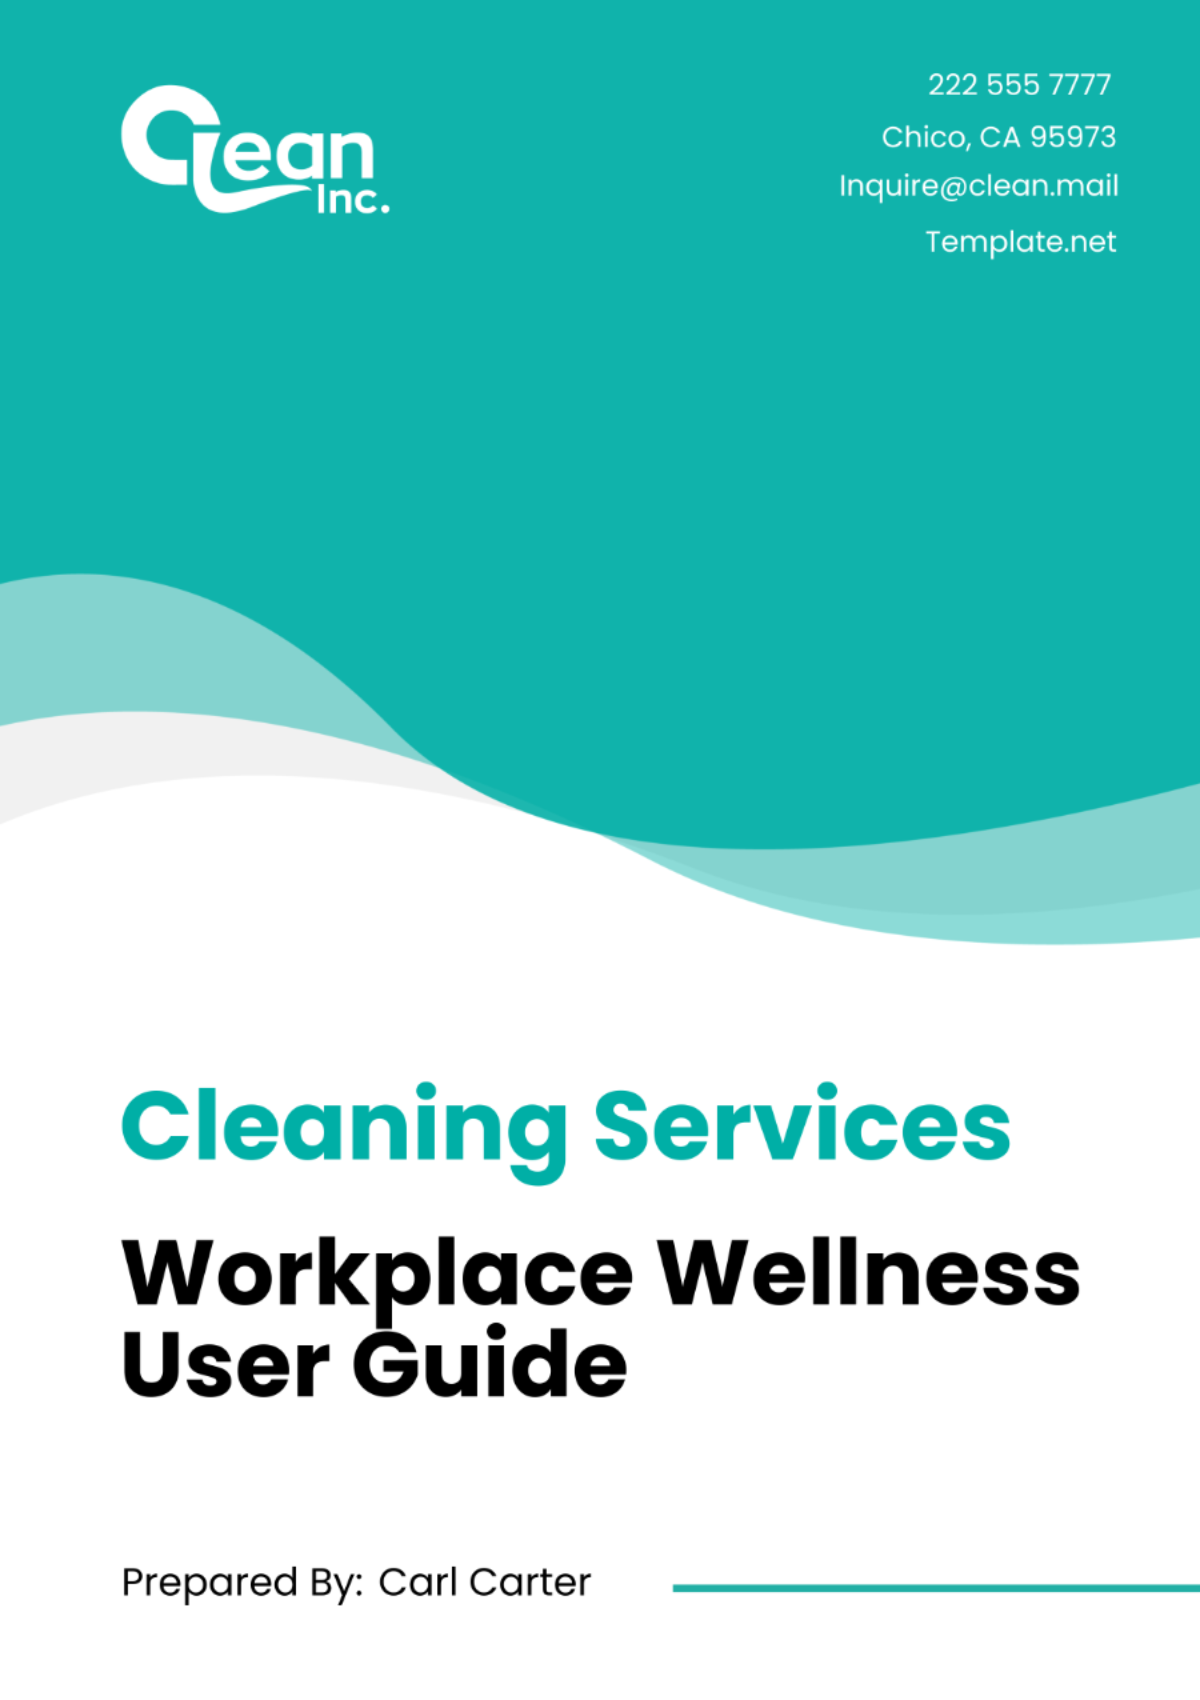 Cleaning Services Workplace Wellness User Guide Template